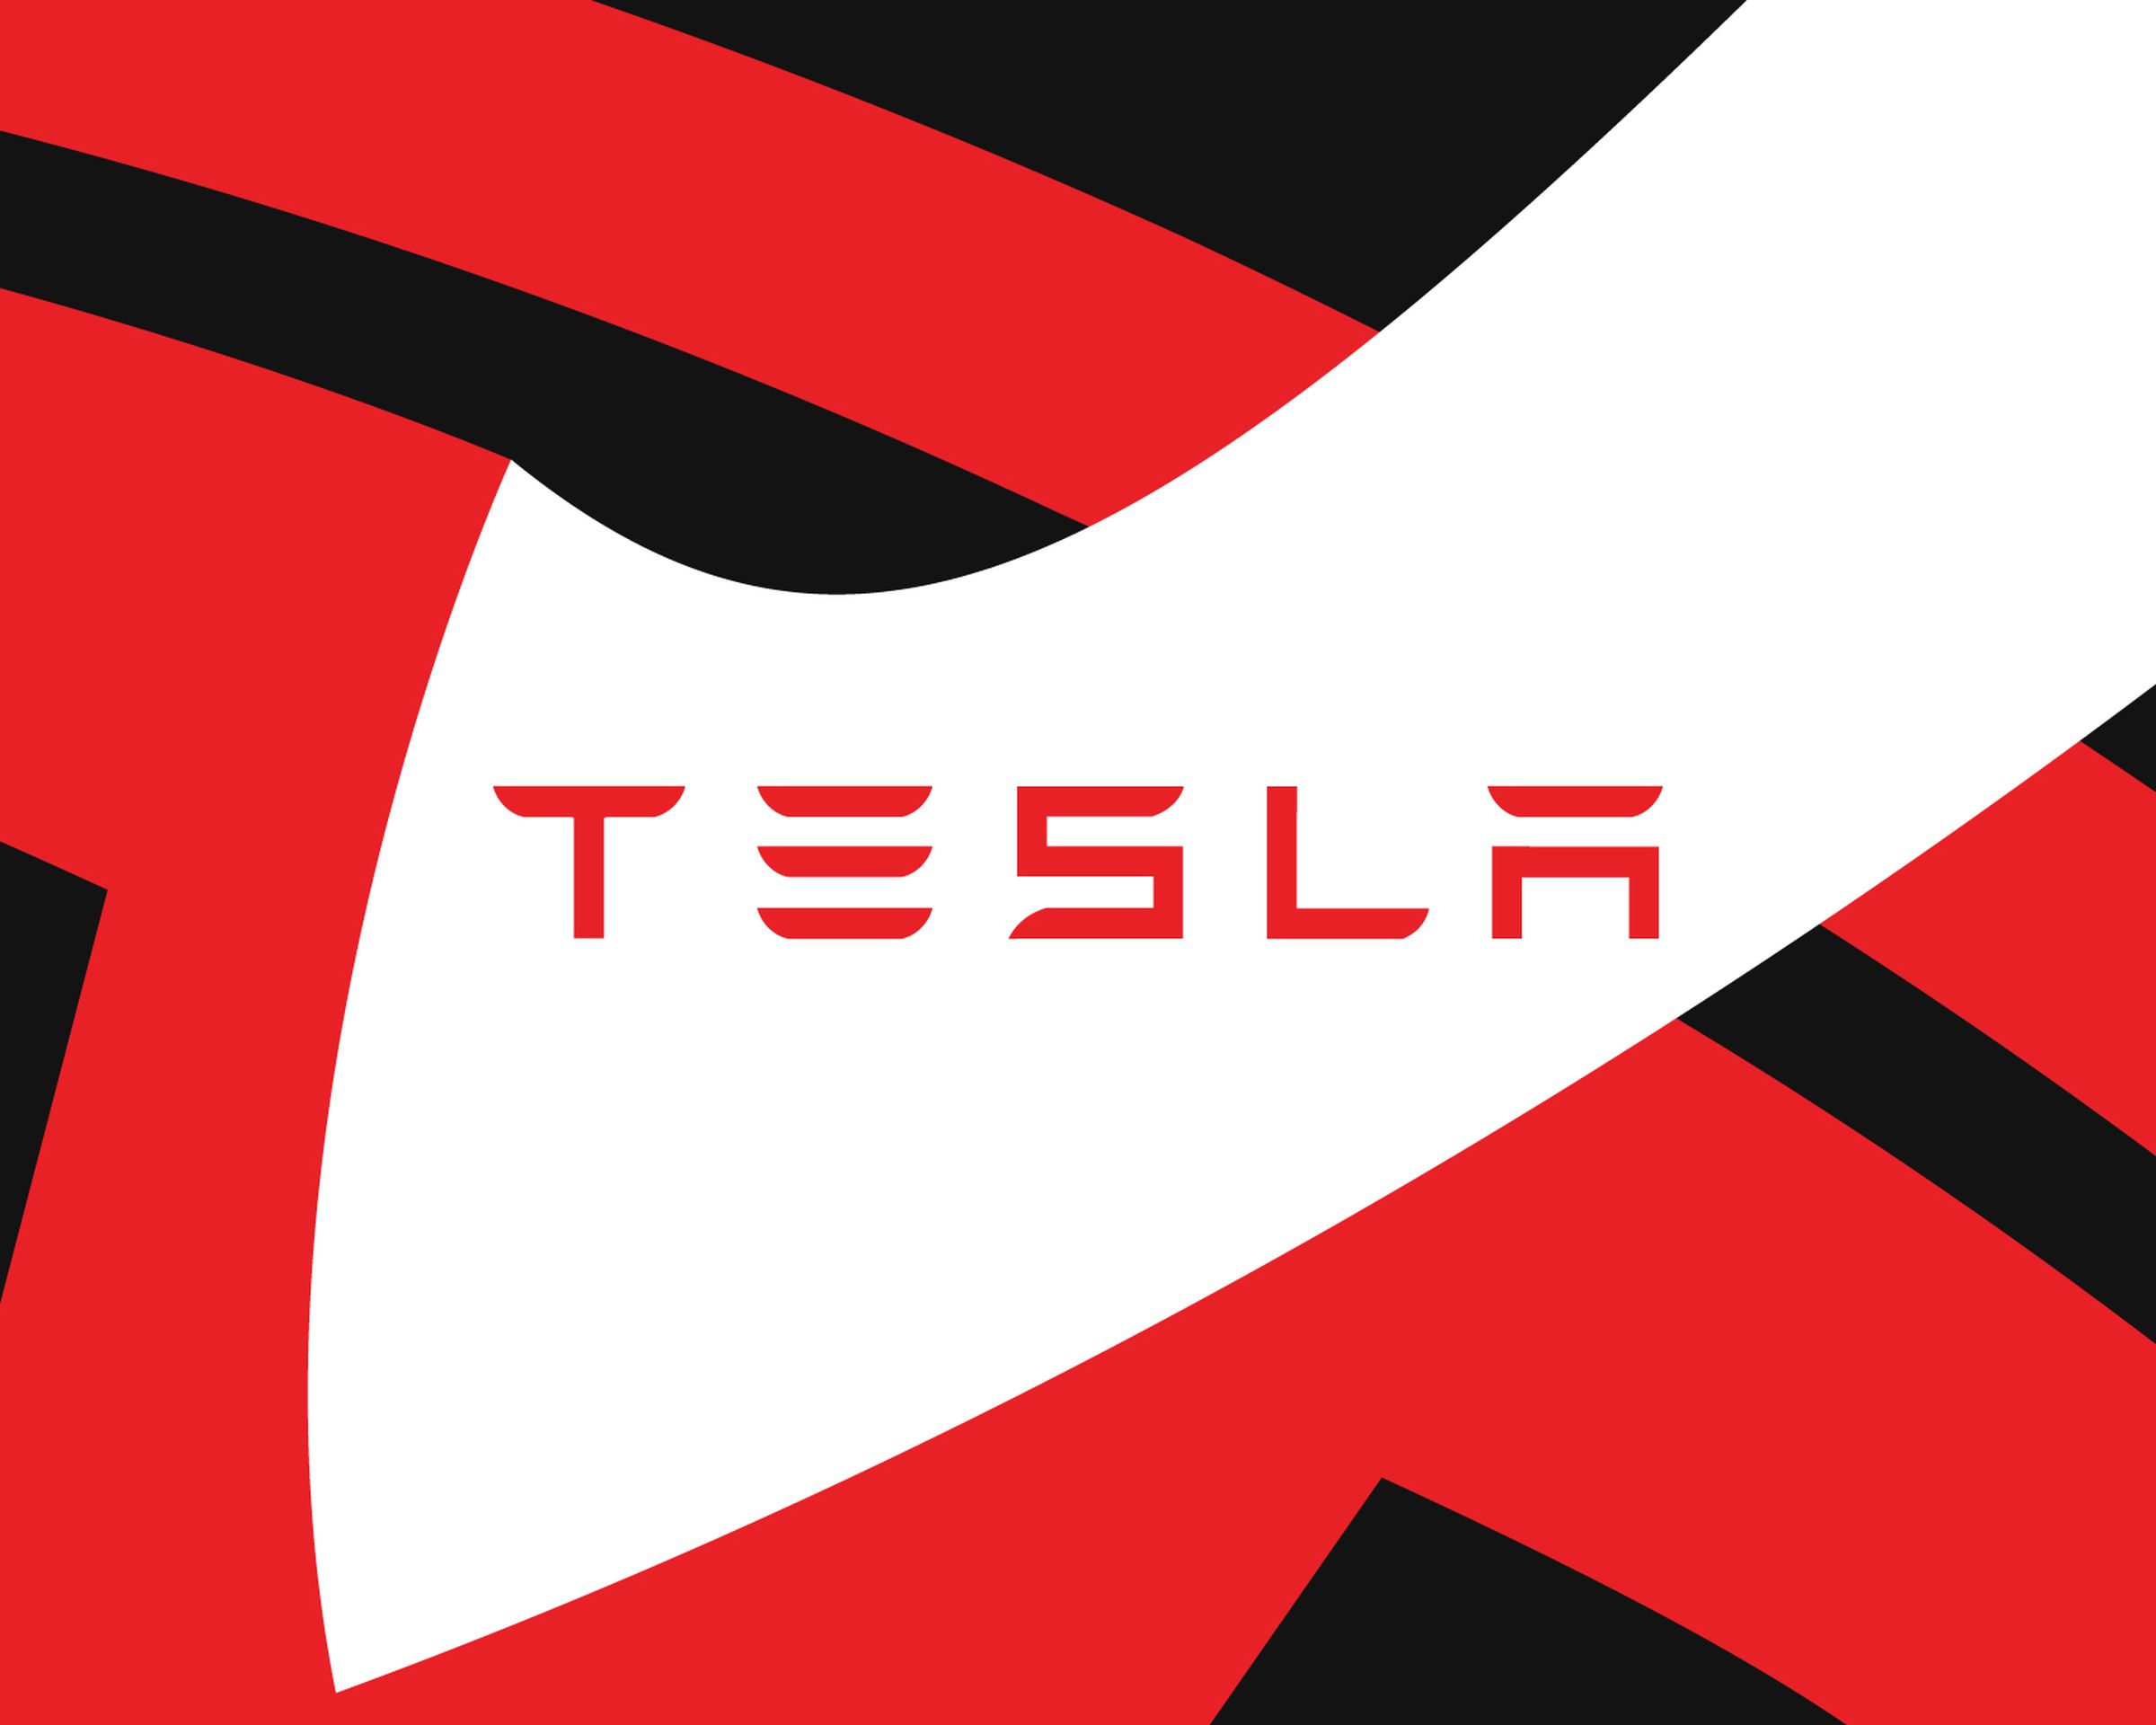 This is a stock image of the Tesla logo spelled out in red with a white shape forming around it and a tilted and zoomed red Tesla T logo behind it.